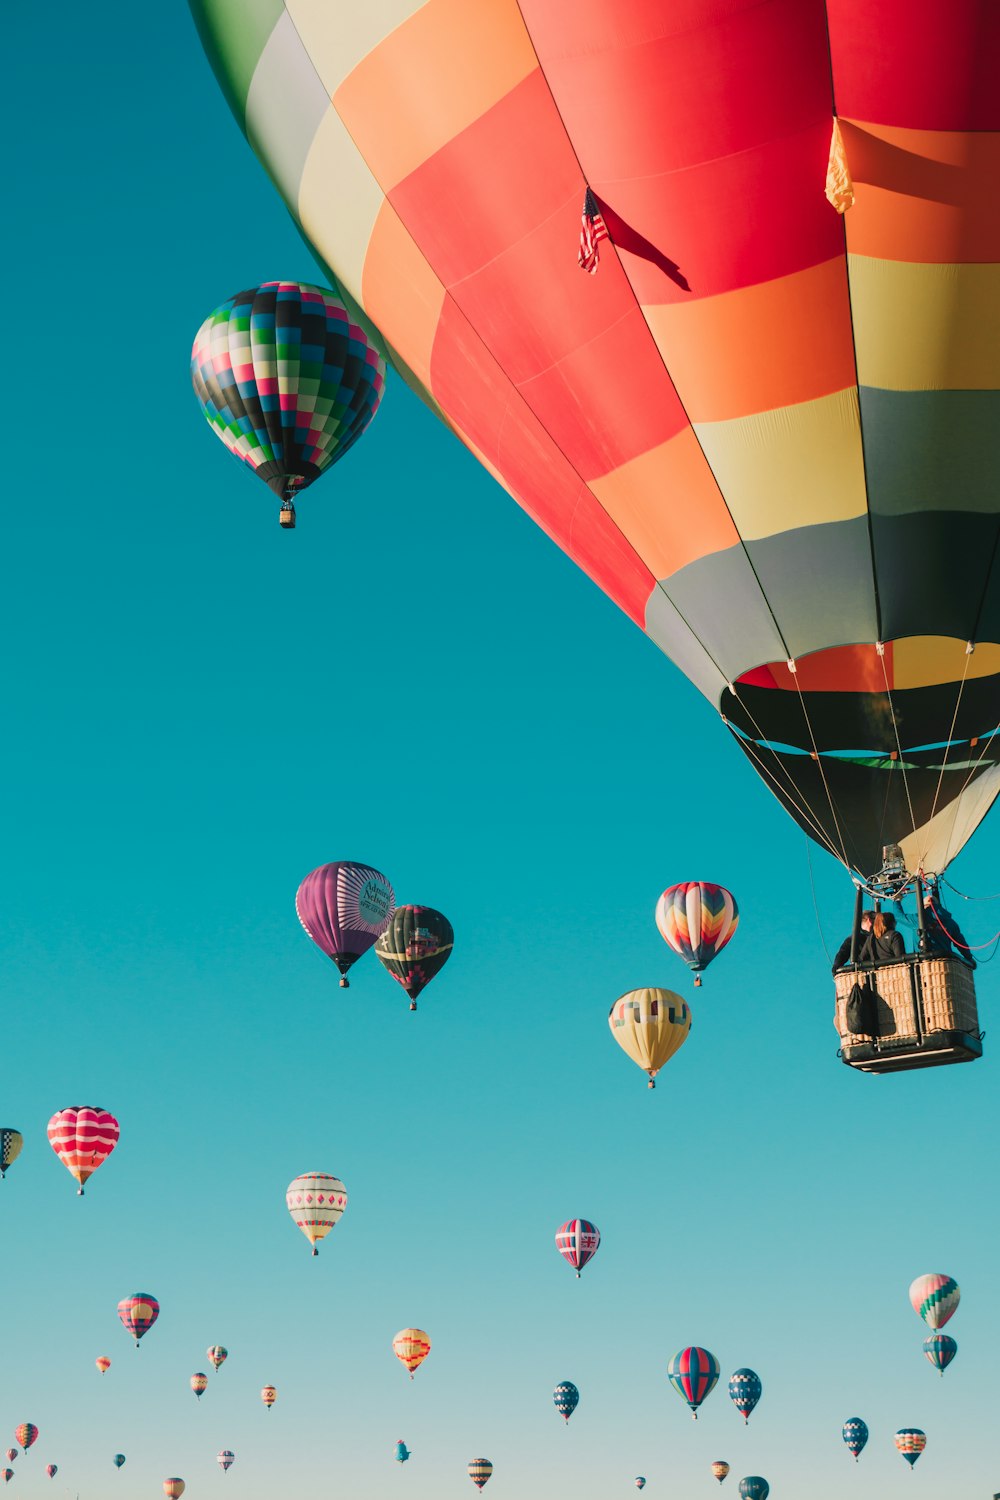 750+ Hot Air Balloon Pictures | Download Free Images on Unsplash